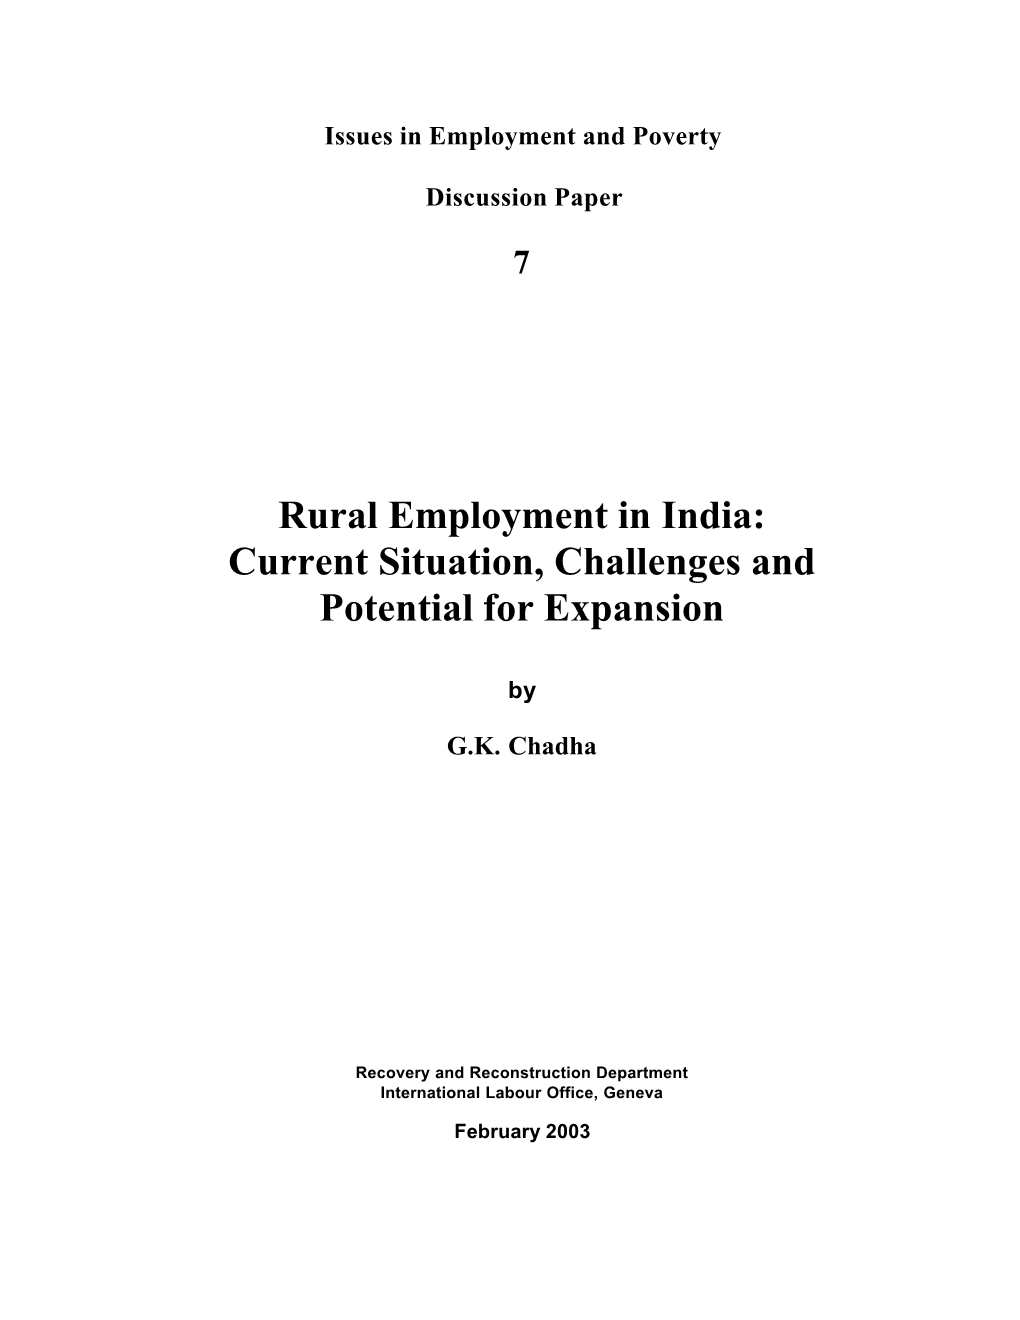 Rural Employment in India: Current Situation, Challenges and Potential for Expansion